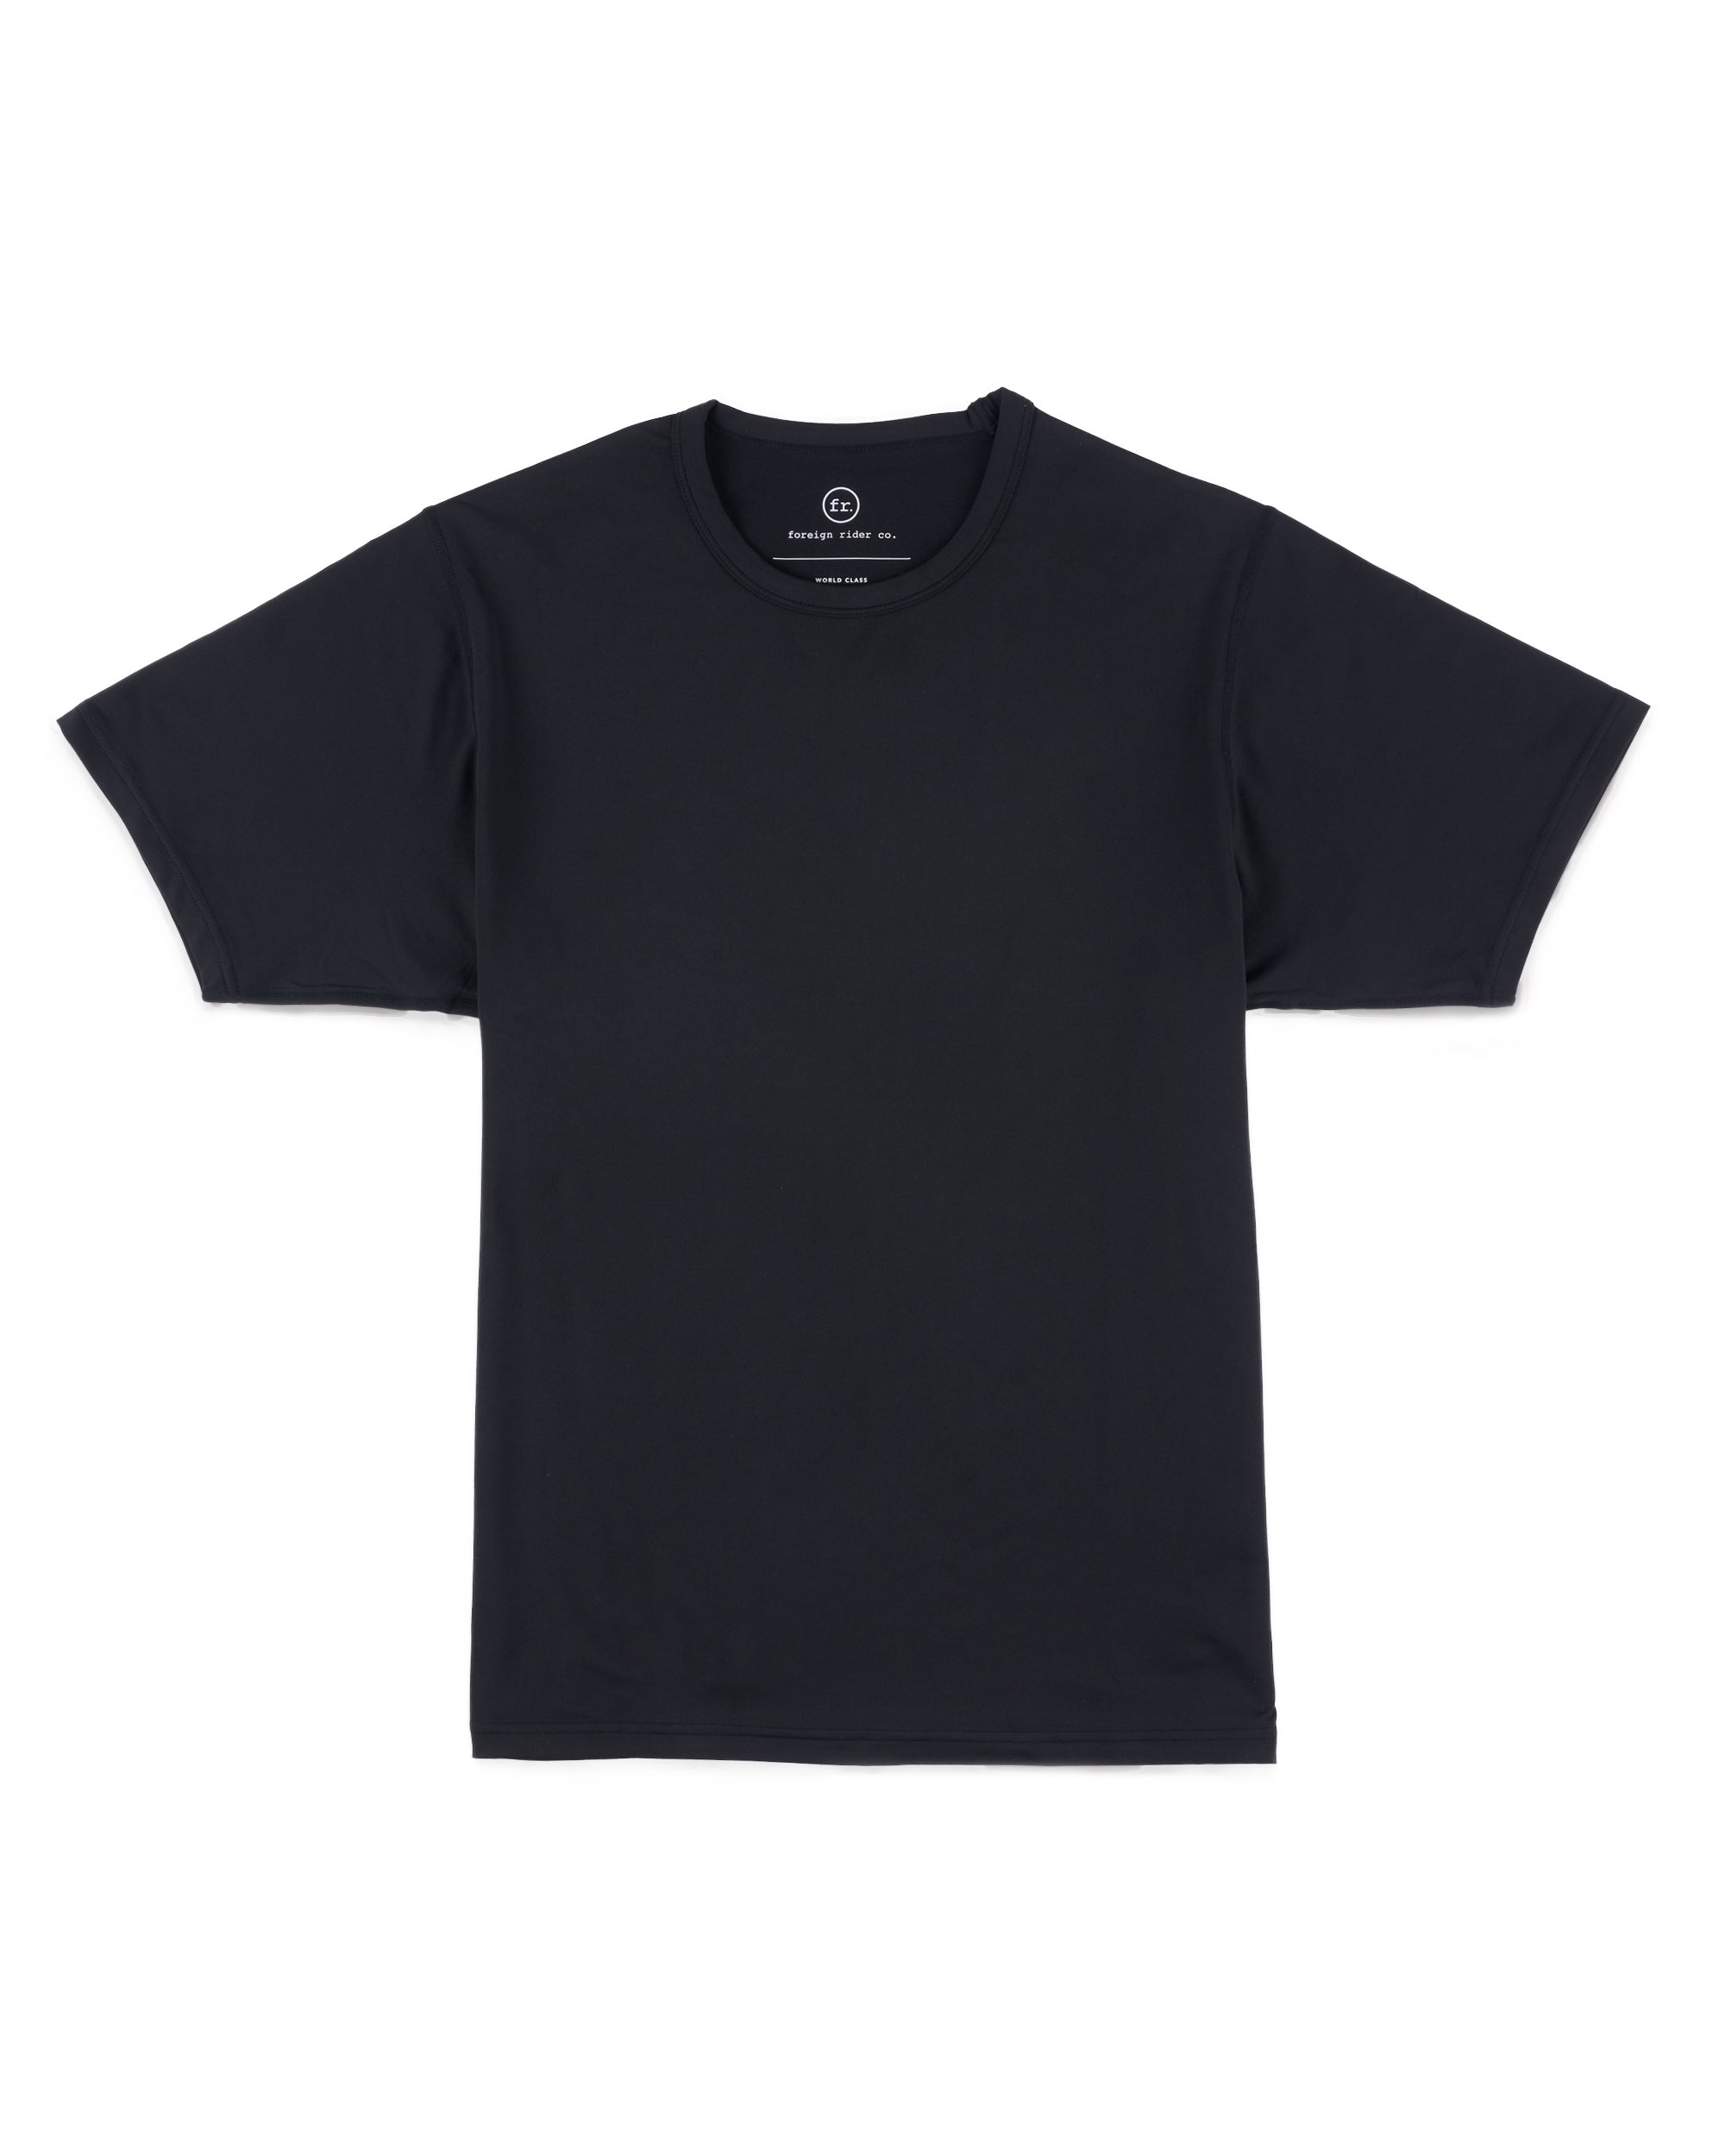 Performance SS T-Shirt Black - Foreign Rider Co.